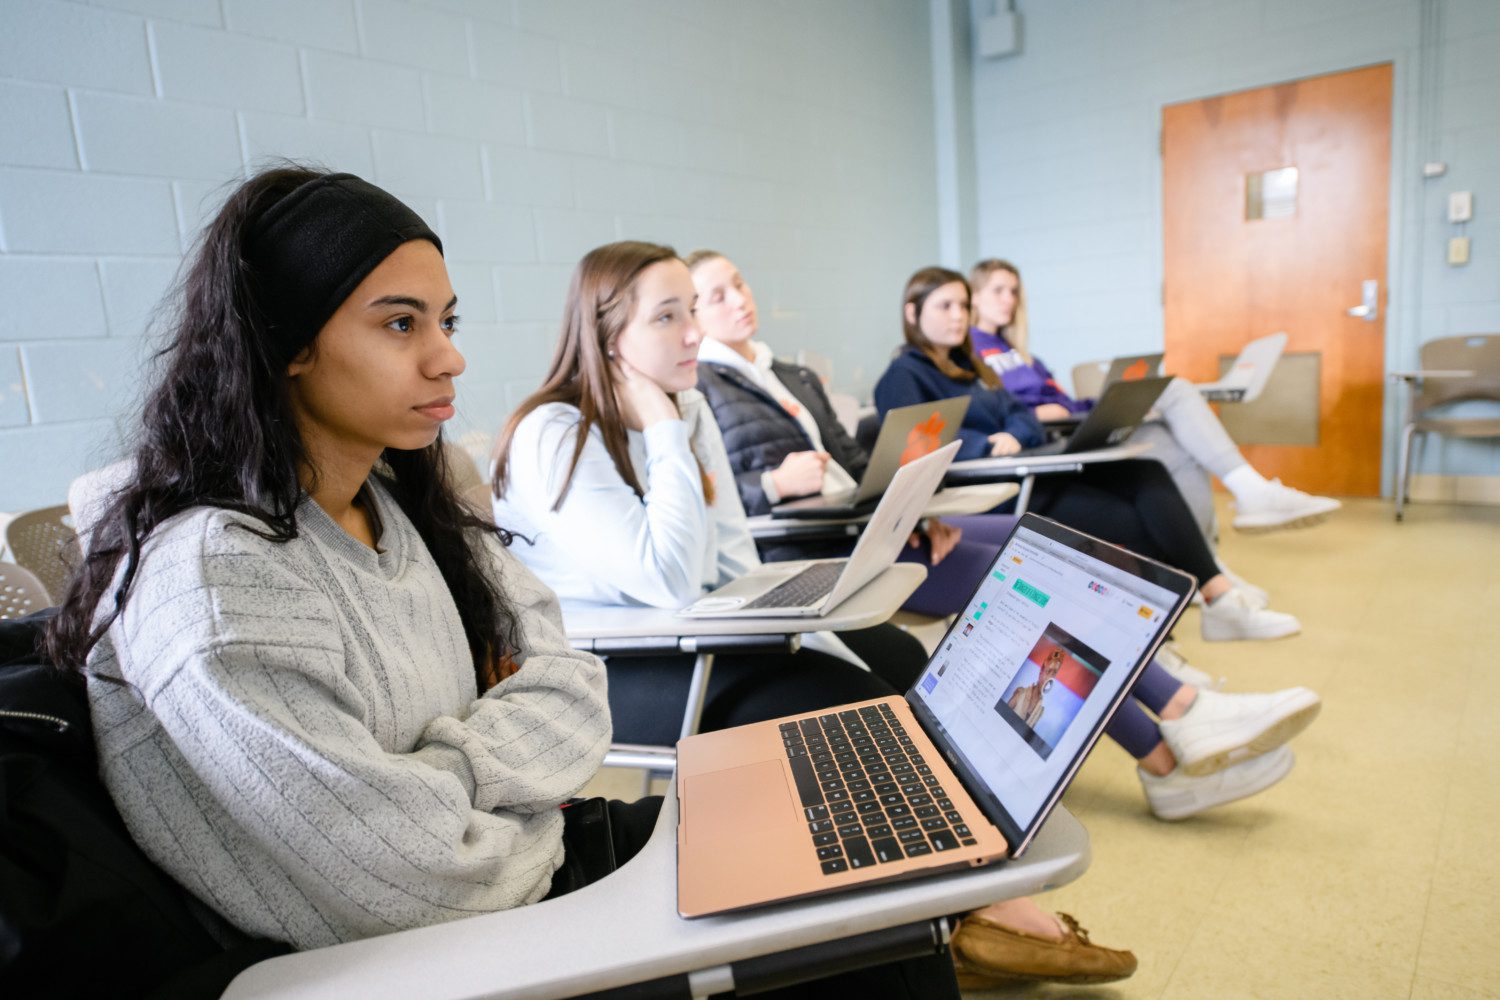 Clemson students will be able to connect with a number of virtual engagement opportunities this summer through the Division of Student Affairs.